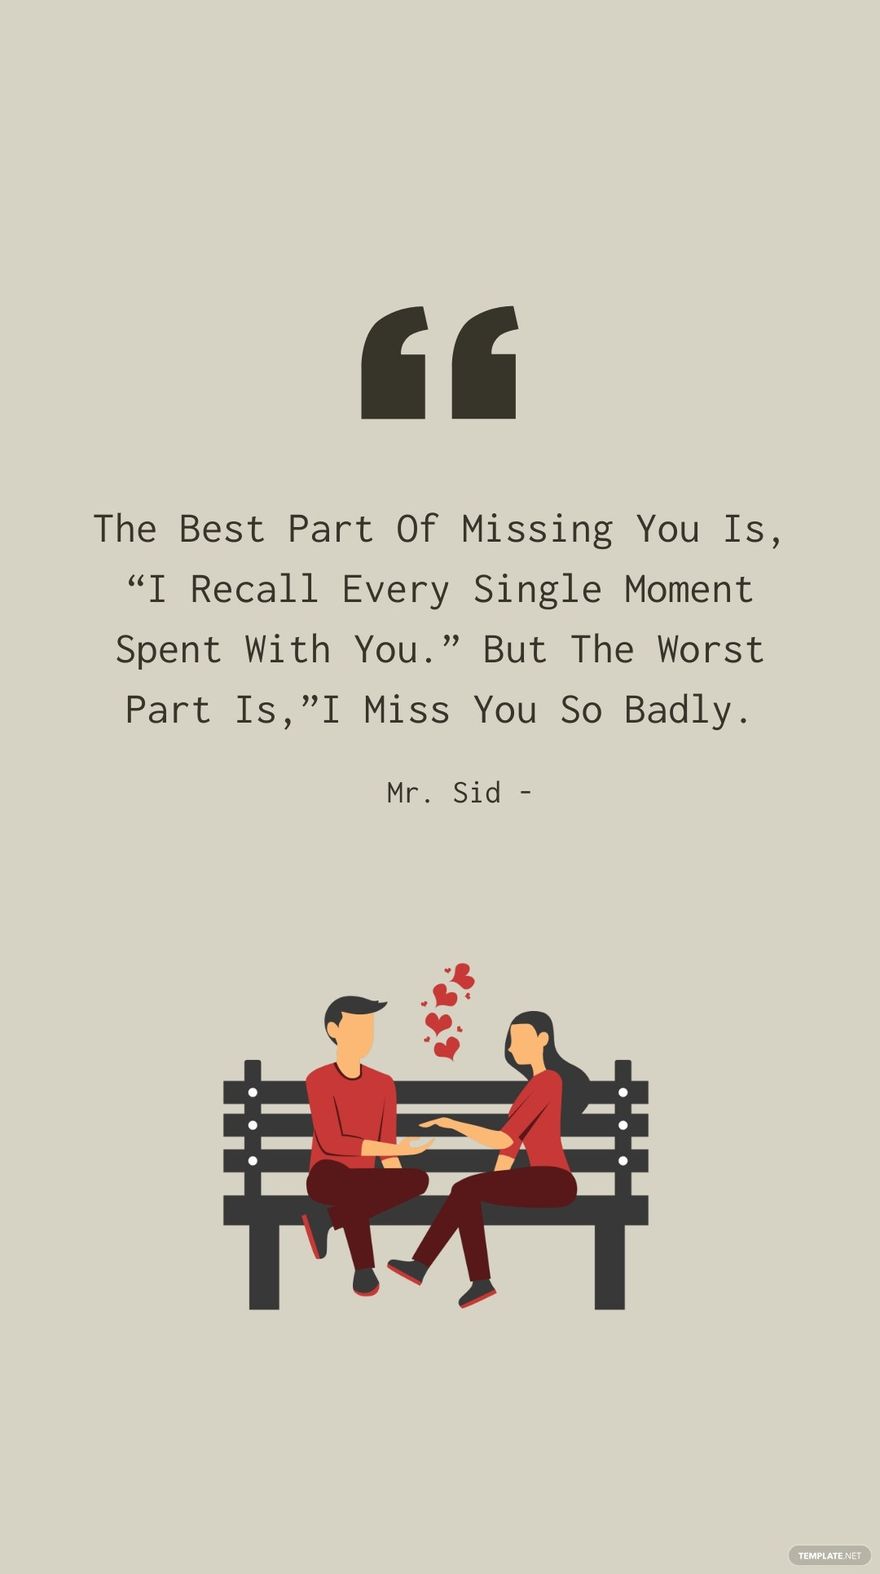 Mr. Sid - The Best Part Of Missing You Is, “I Recall Every Single Moment Spent With You.” But The Worst Part Is,”I Miss You So Badly.